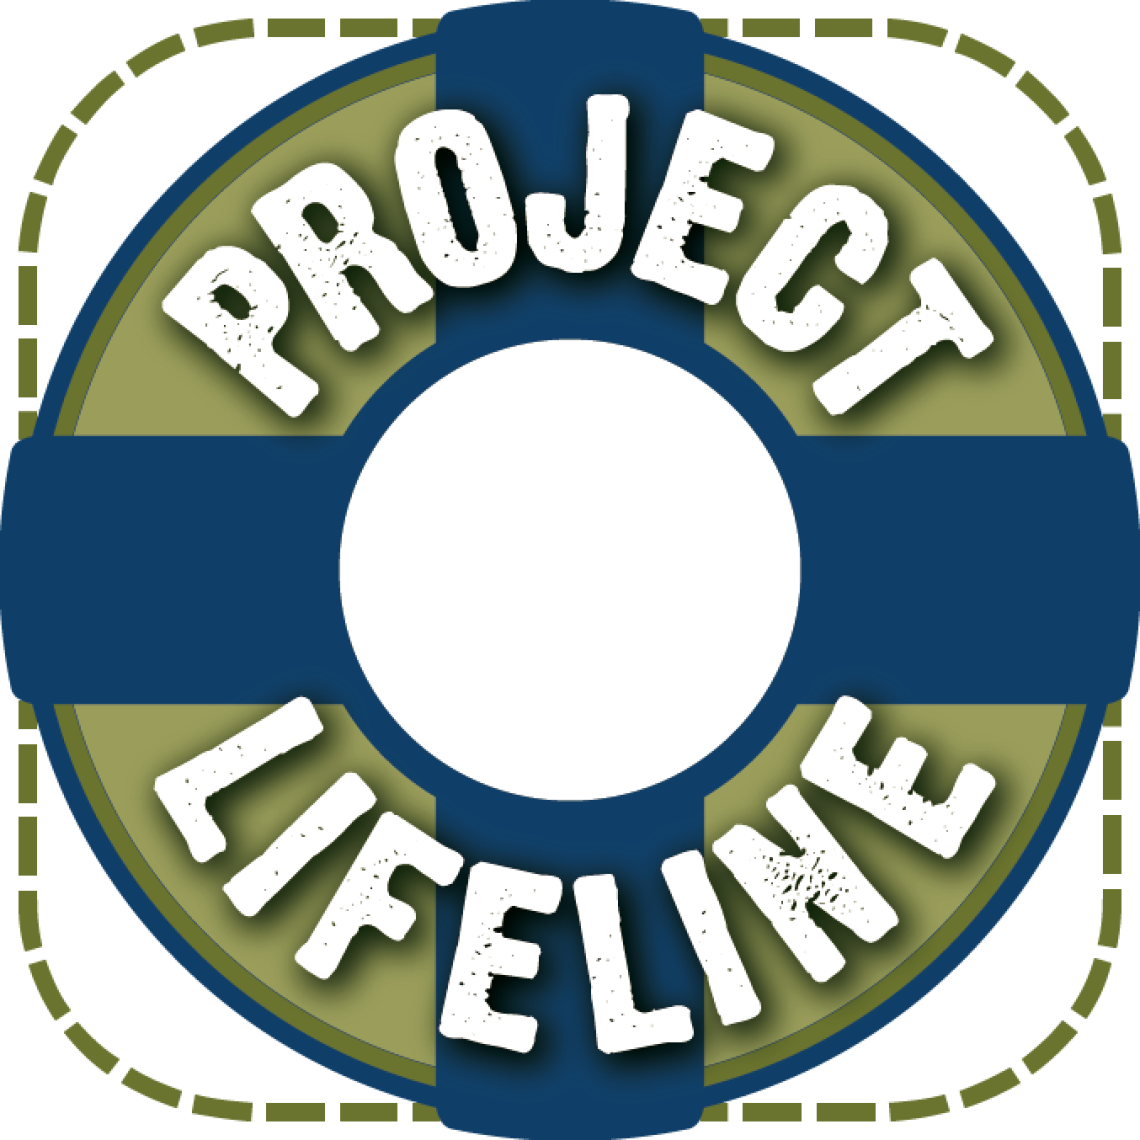 Image of lifesafer ring with the words Project Lifeline